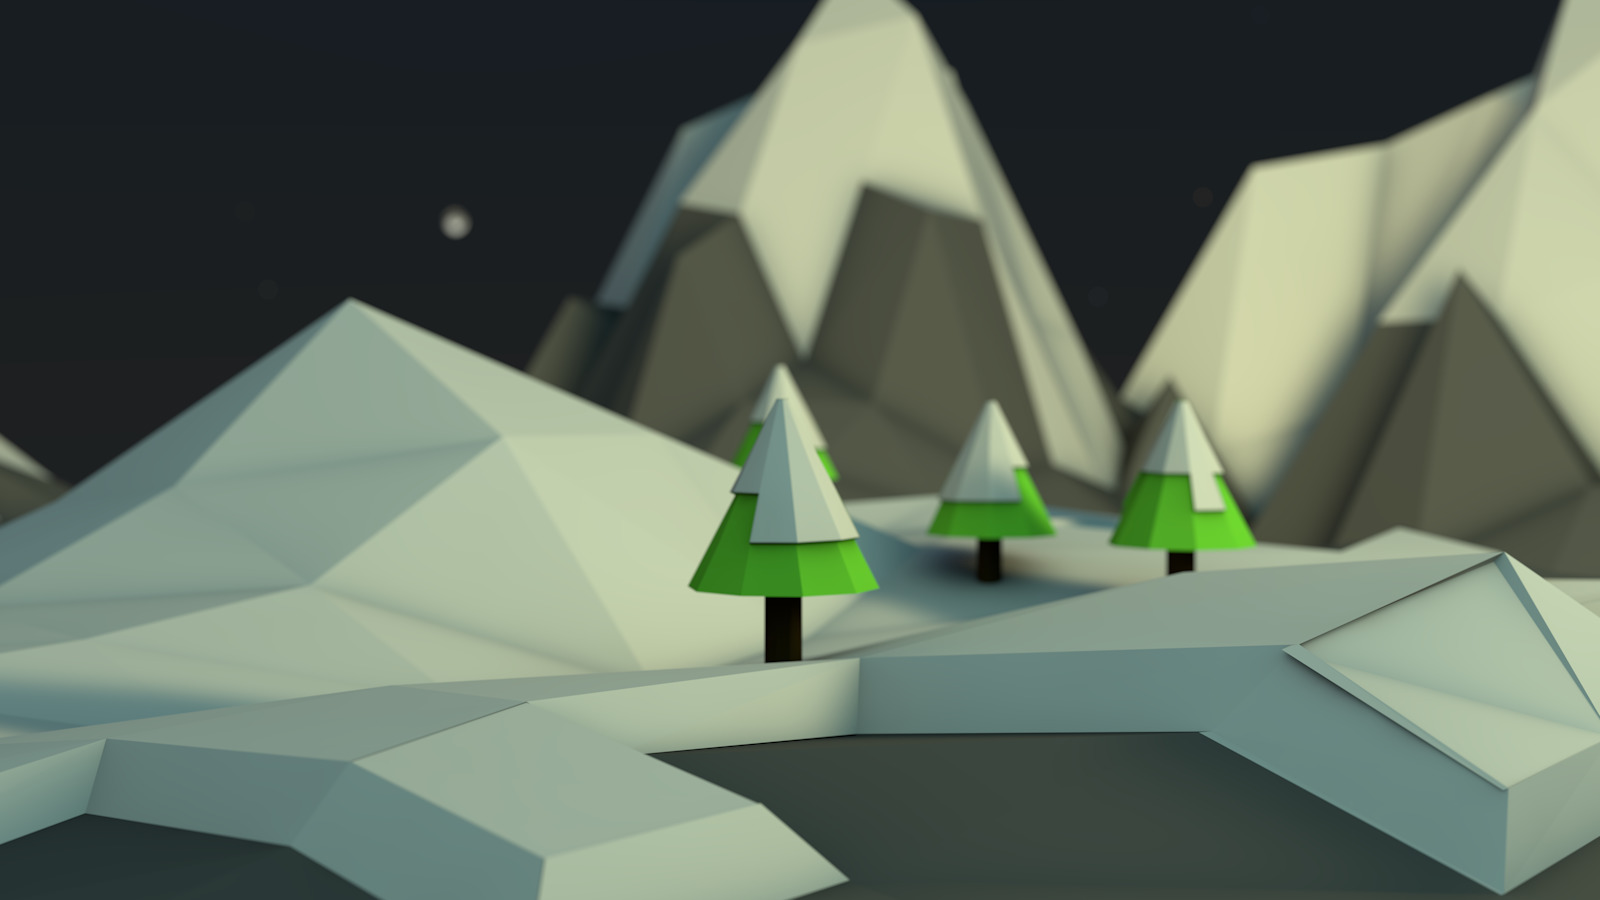 abstract, Pixelated, Digital art, Artwork, Minimalism, Low poly, Trees, Mountains, Moon, Snow Wallpaper